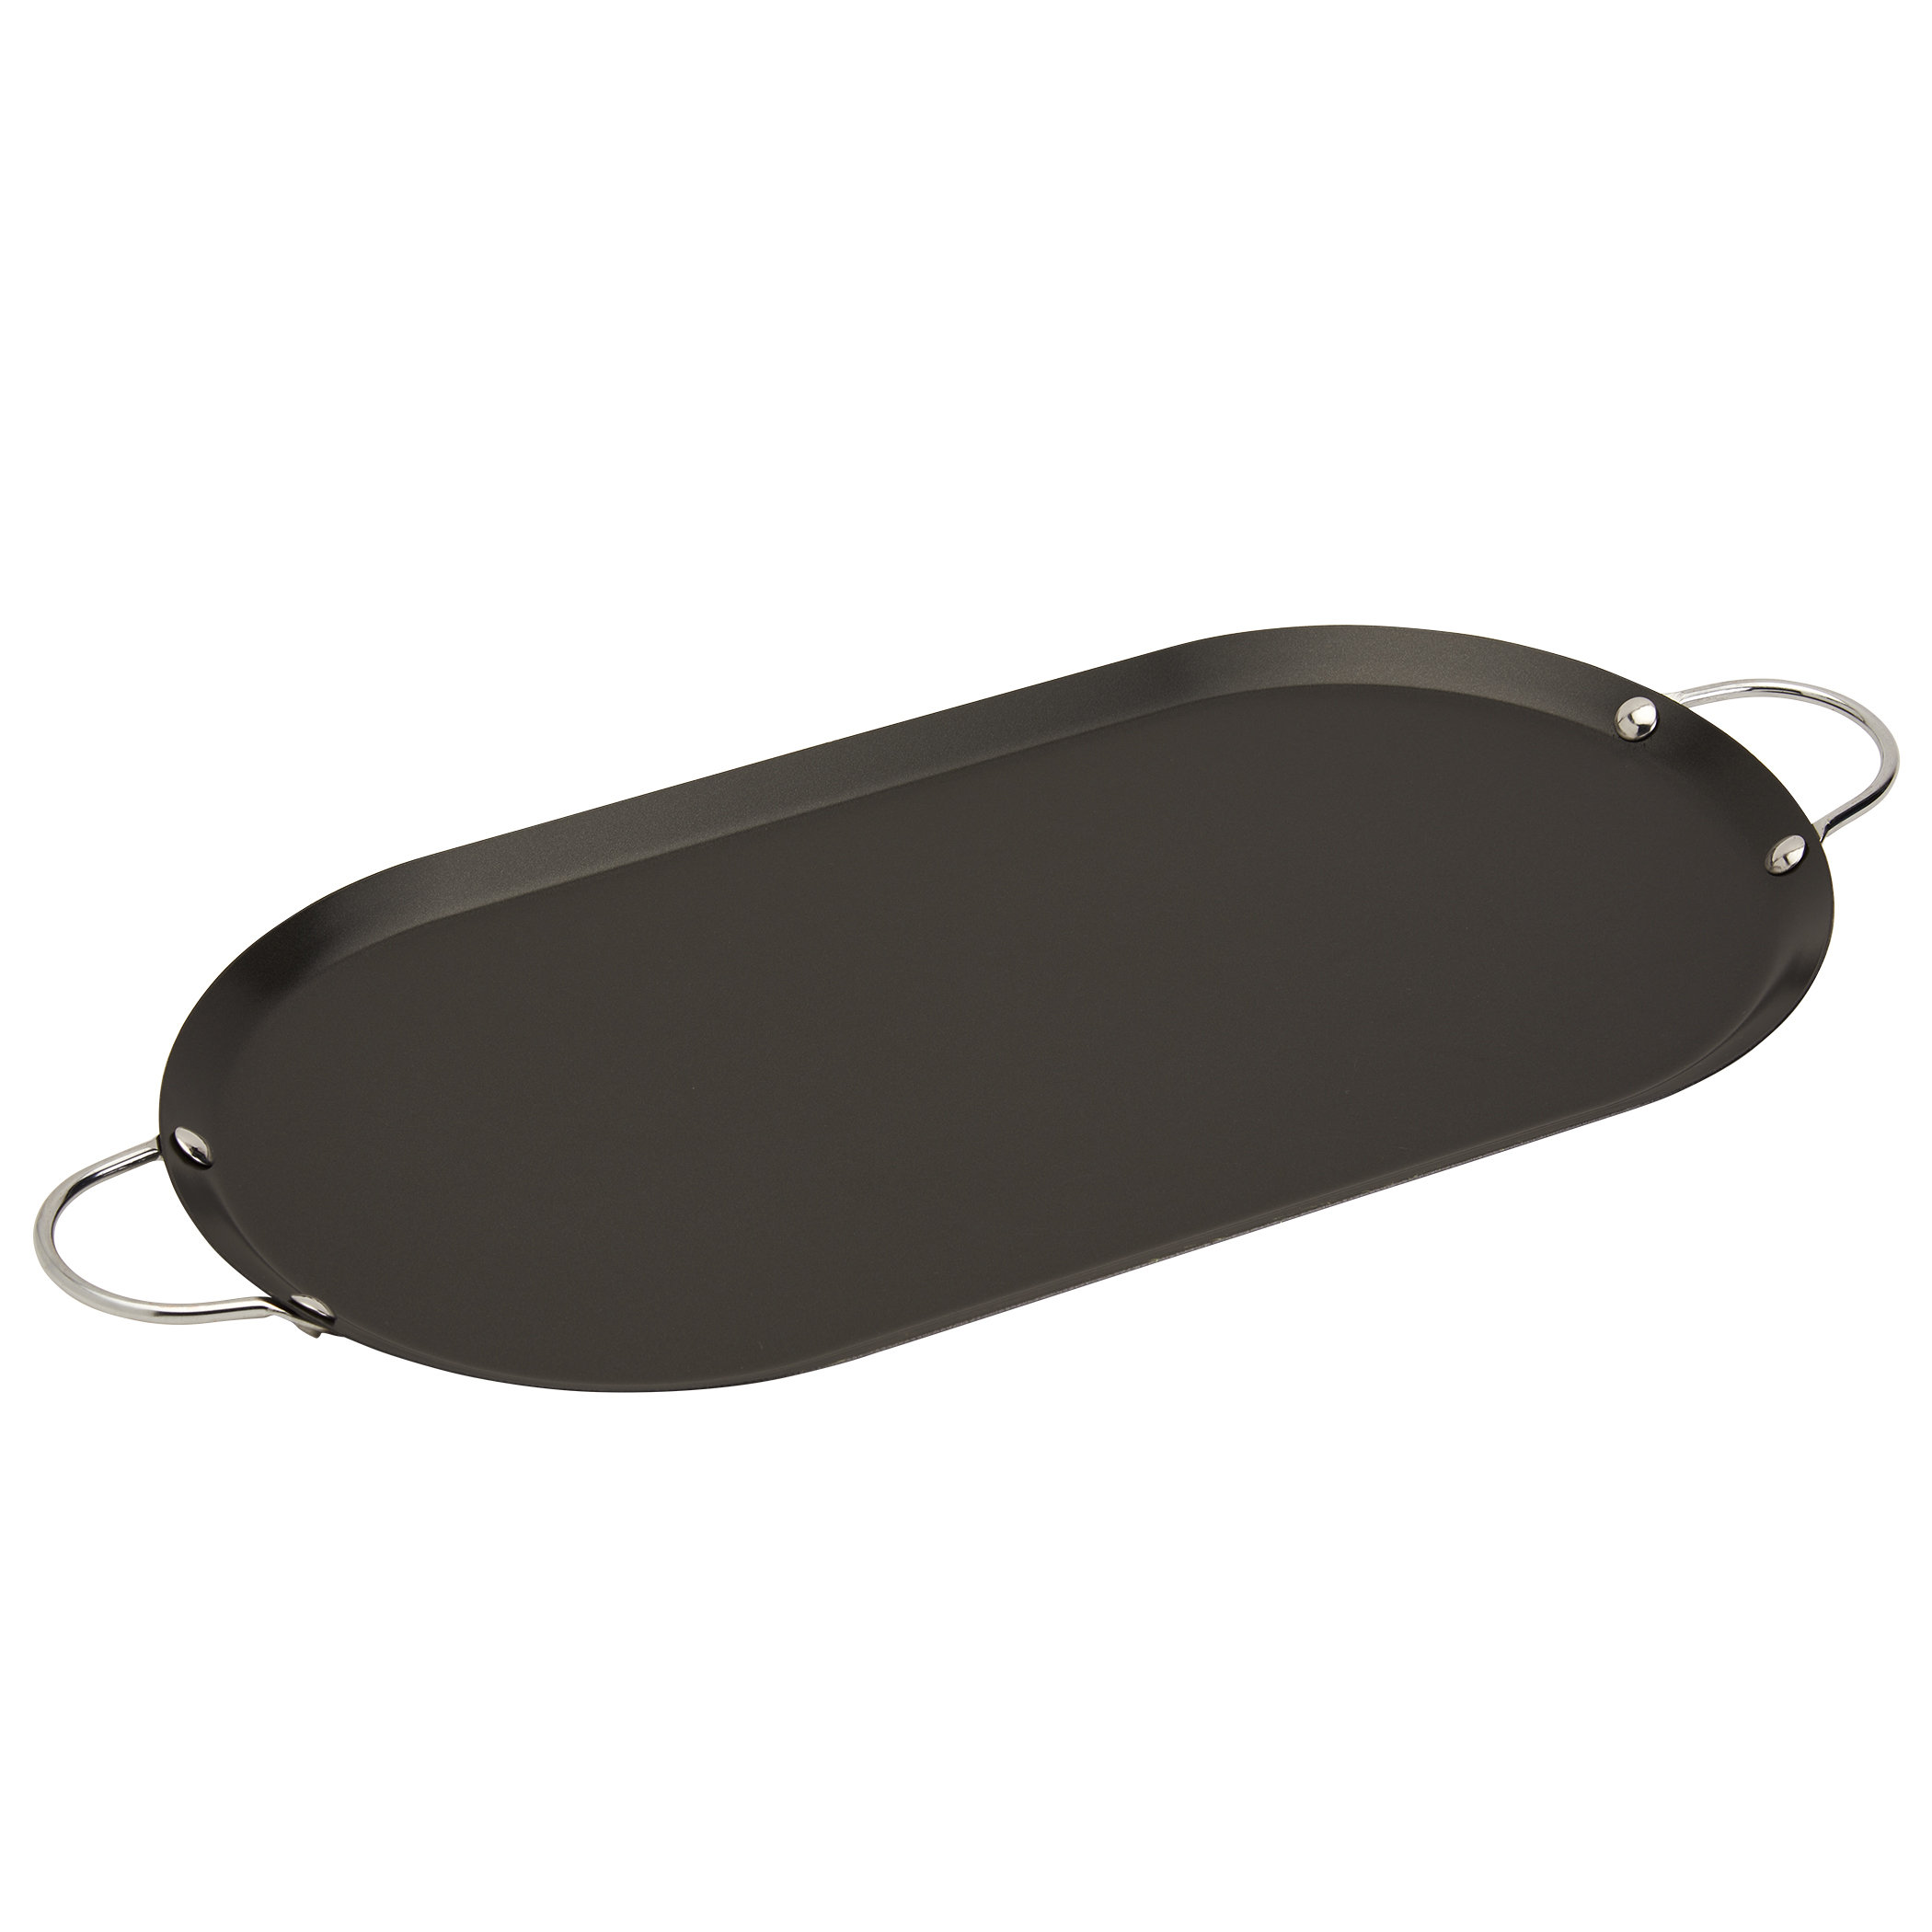 IMUSA Carbon Steel Oval Comal 17 in